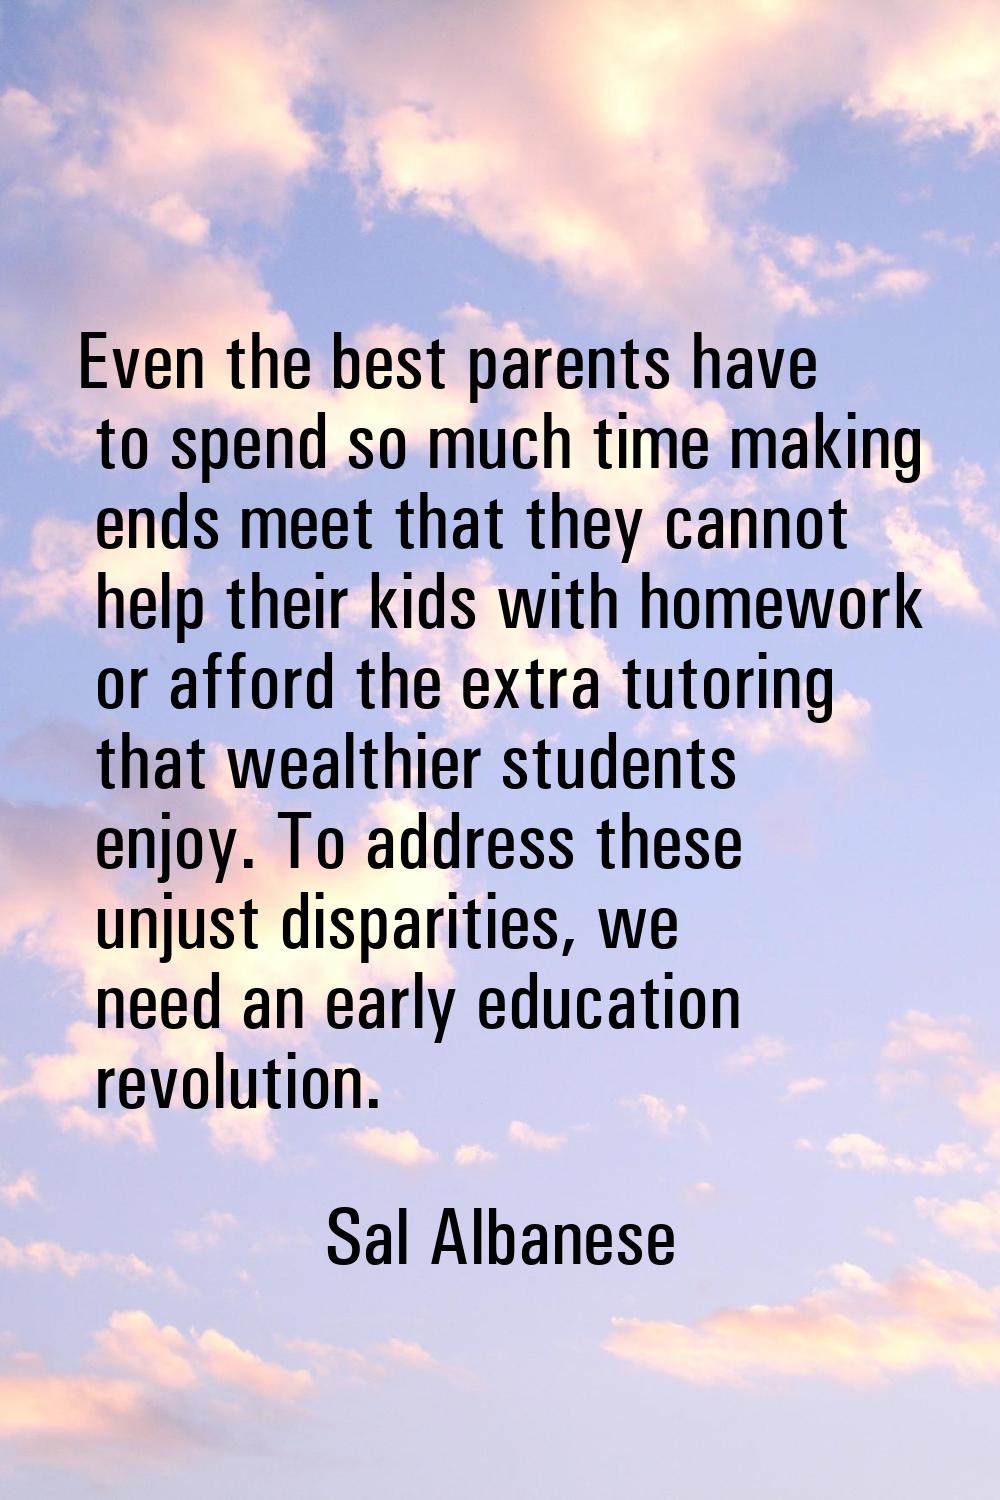 Even the best parents have to spend so much time making ends meet that they cannot help their kids 